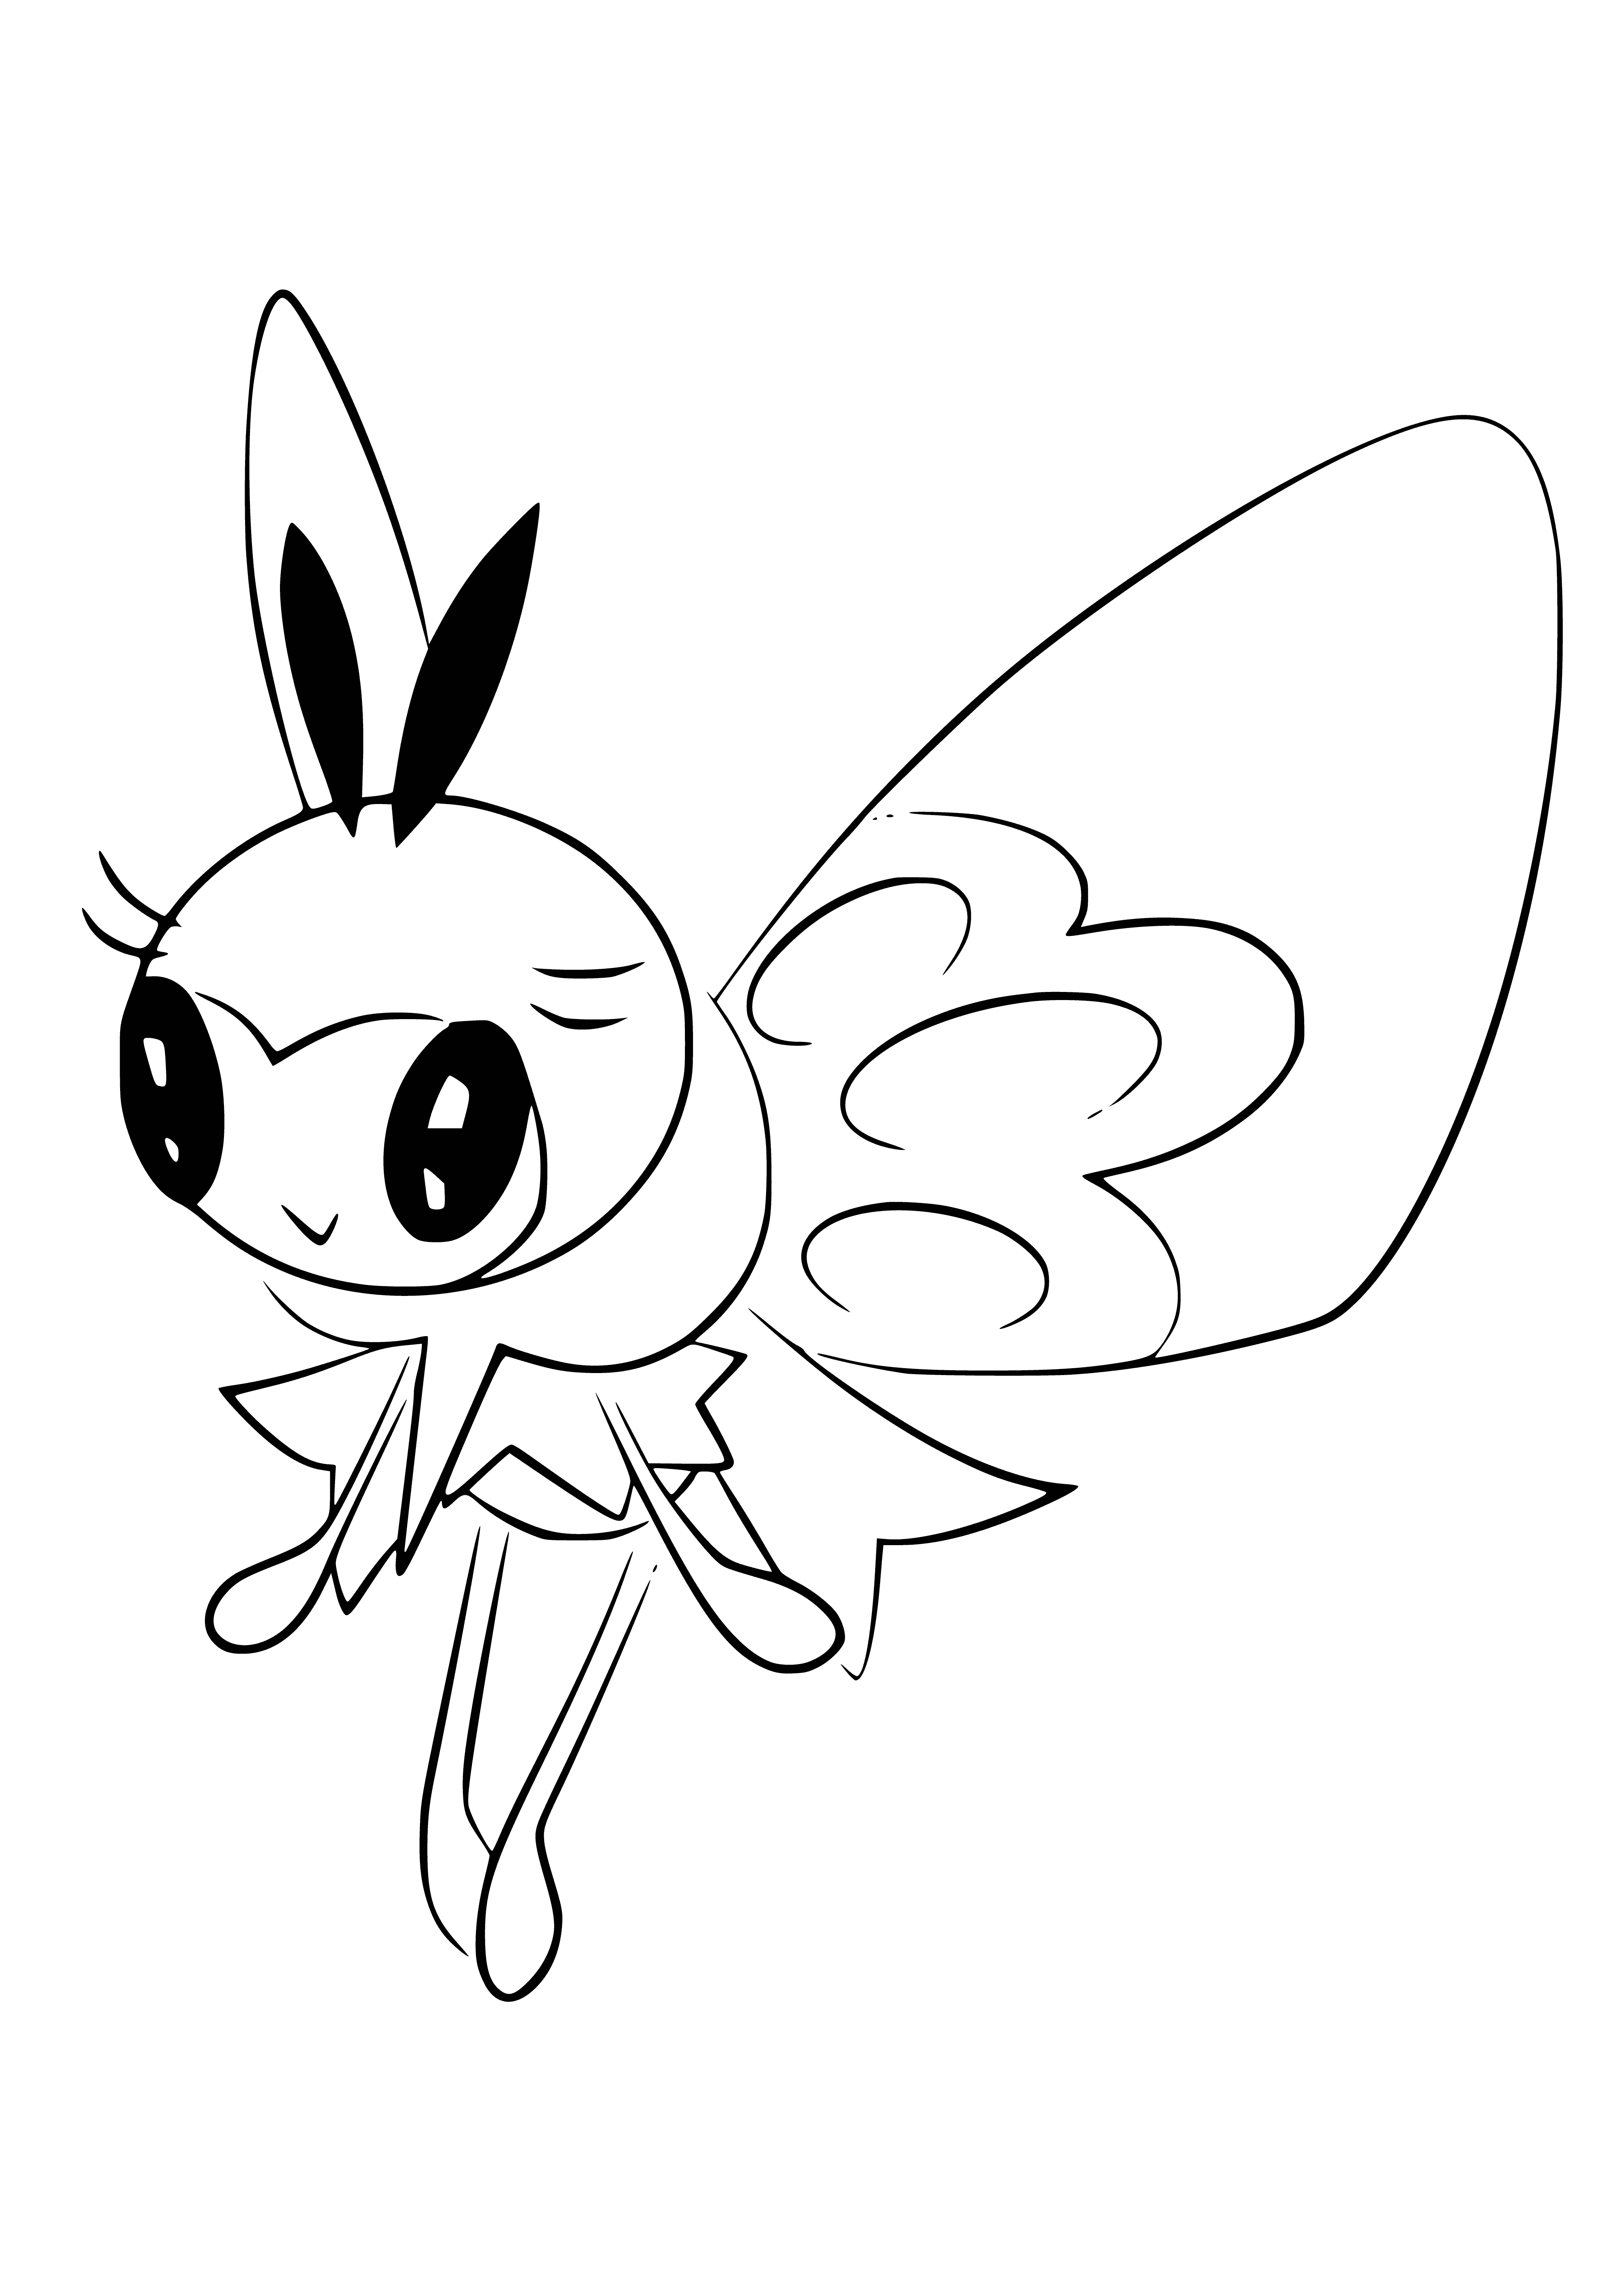 Pokemon Ribombee coloring page